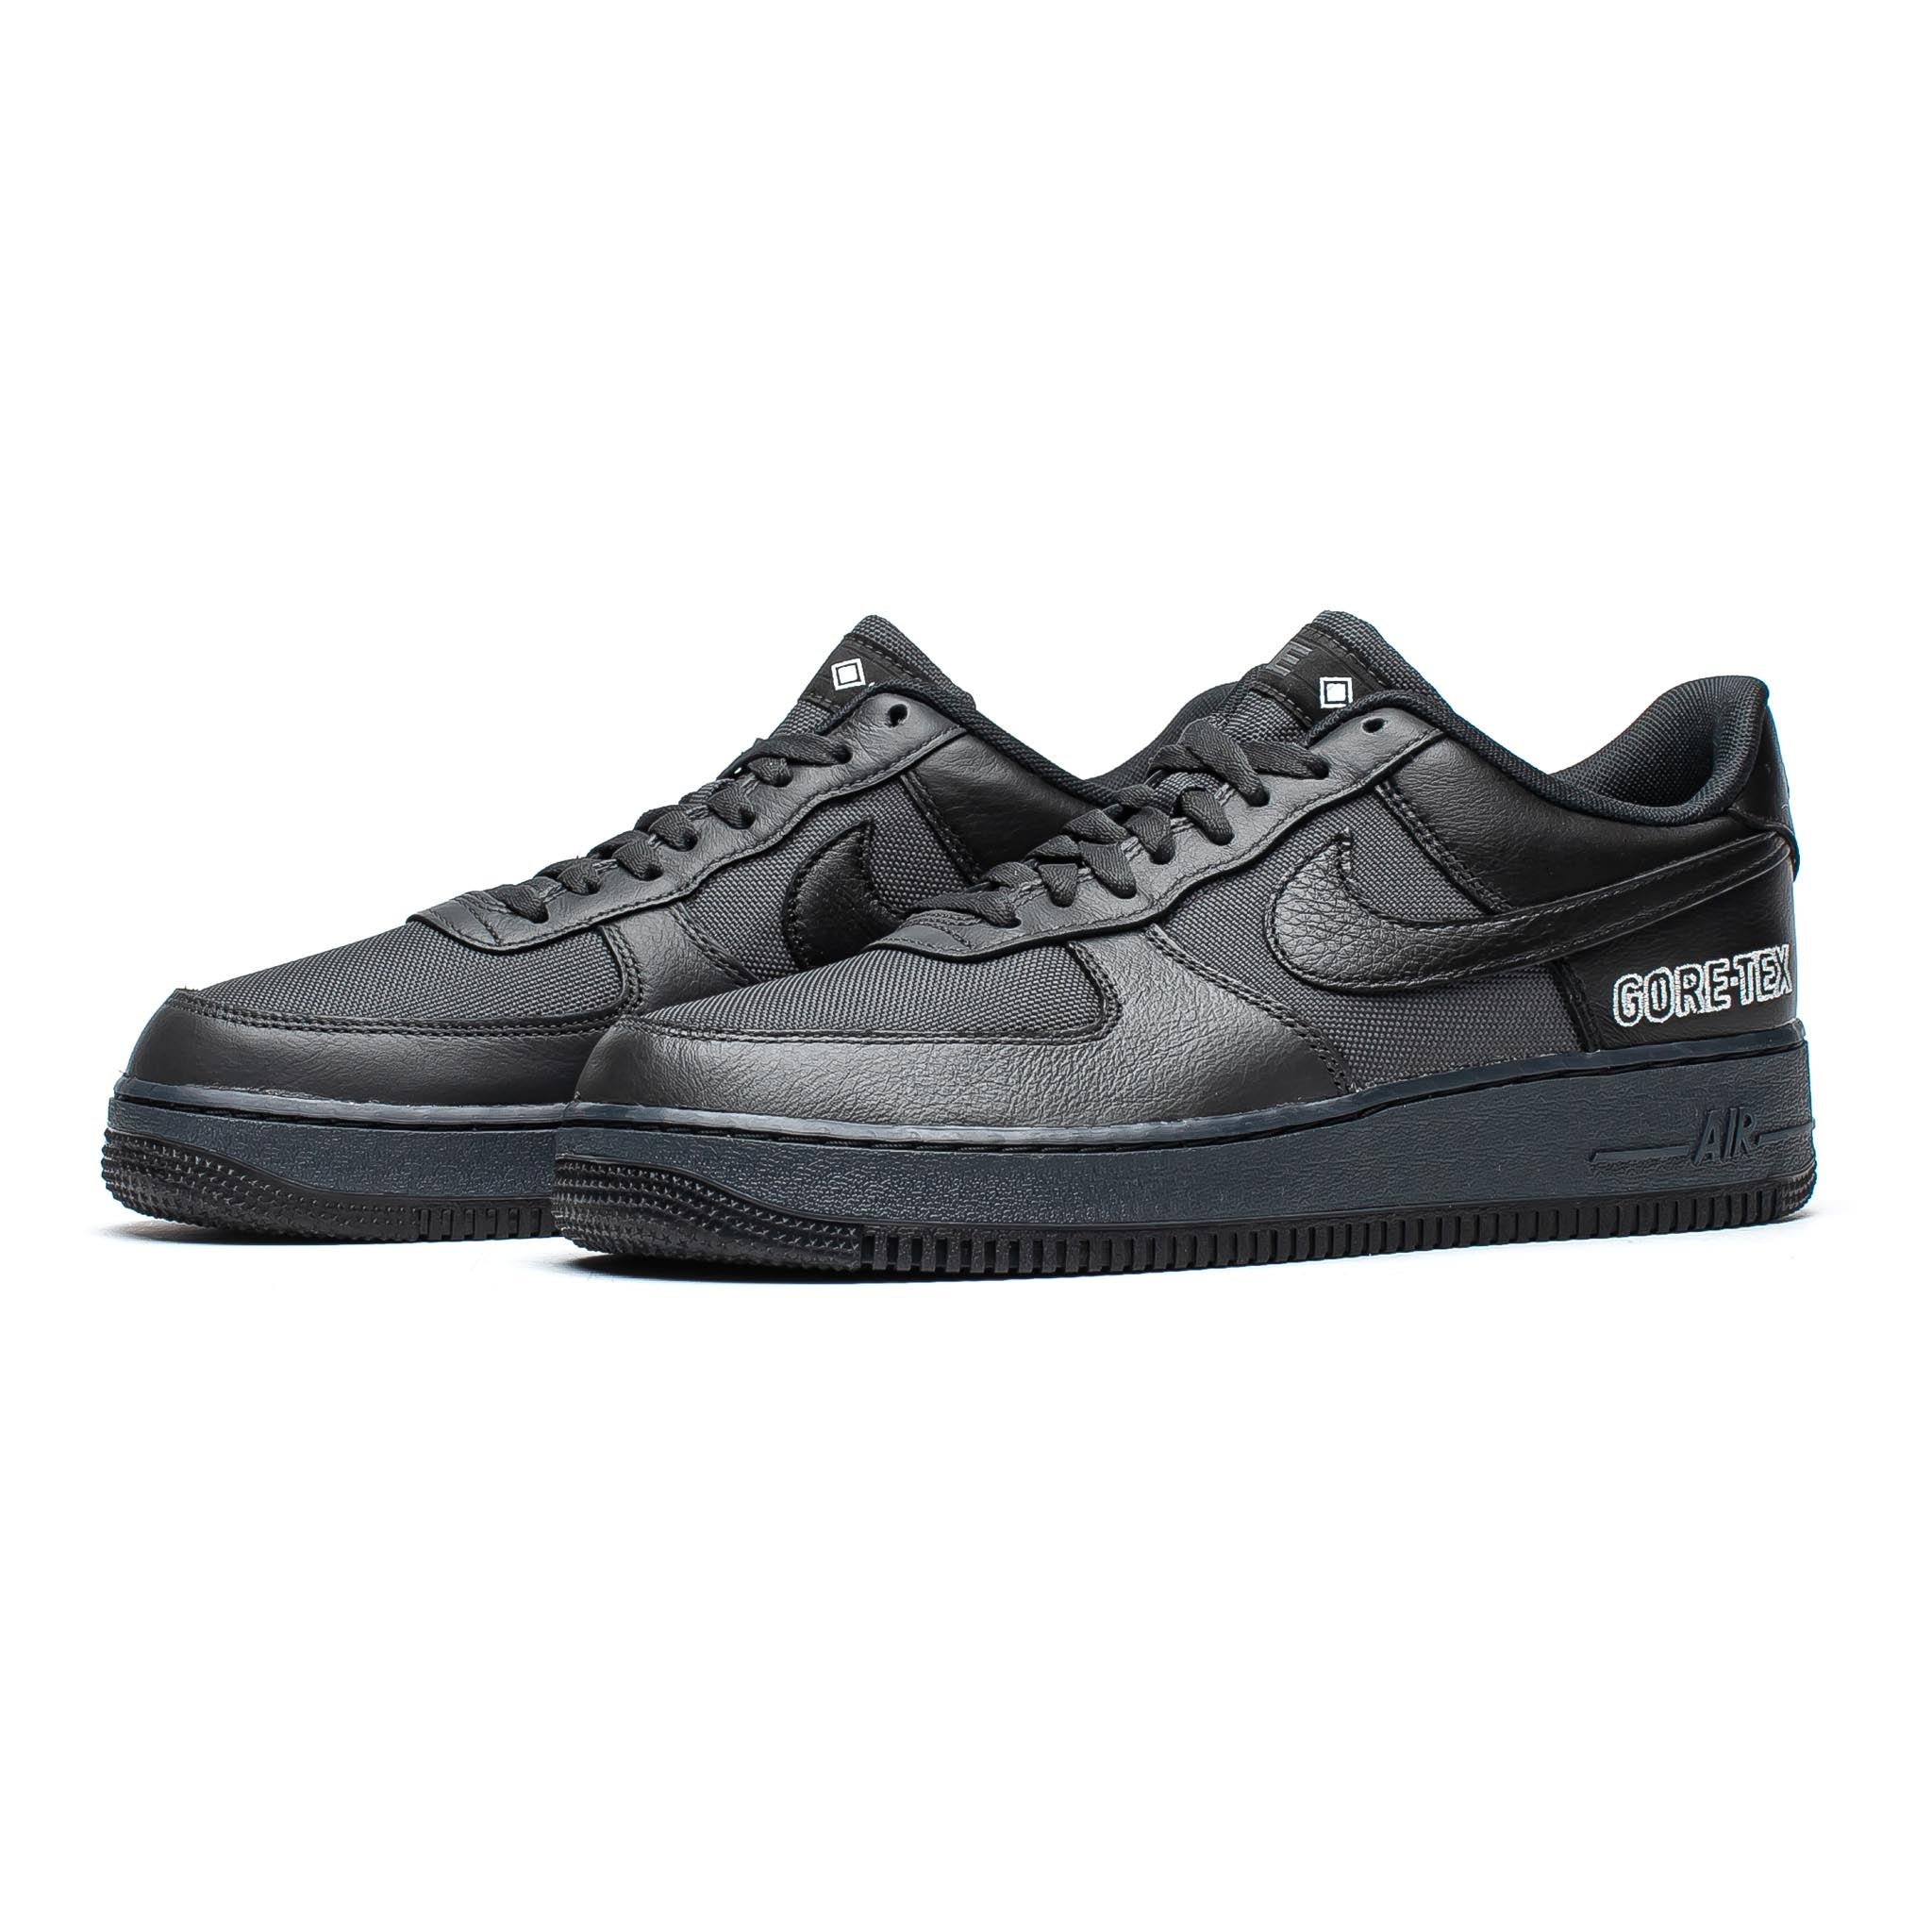 Nike Air Force 1 Low 'GORE-TEX' Black/Anthracite